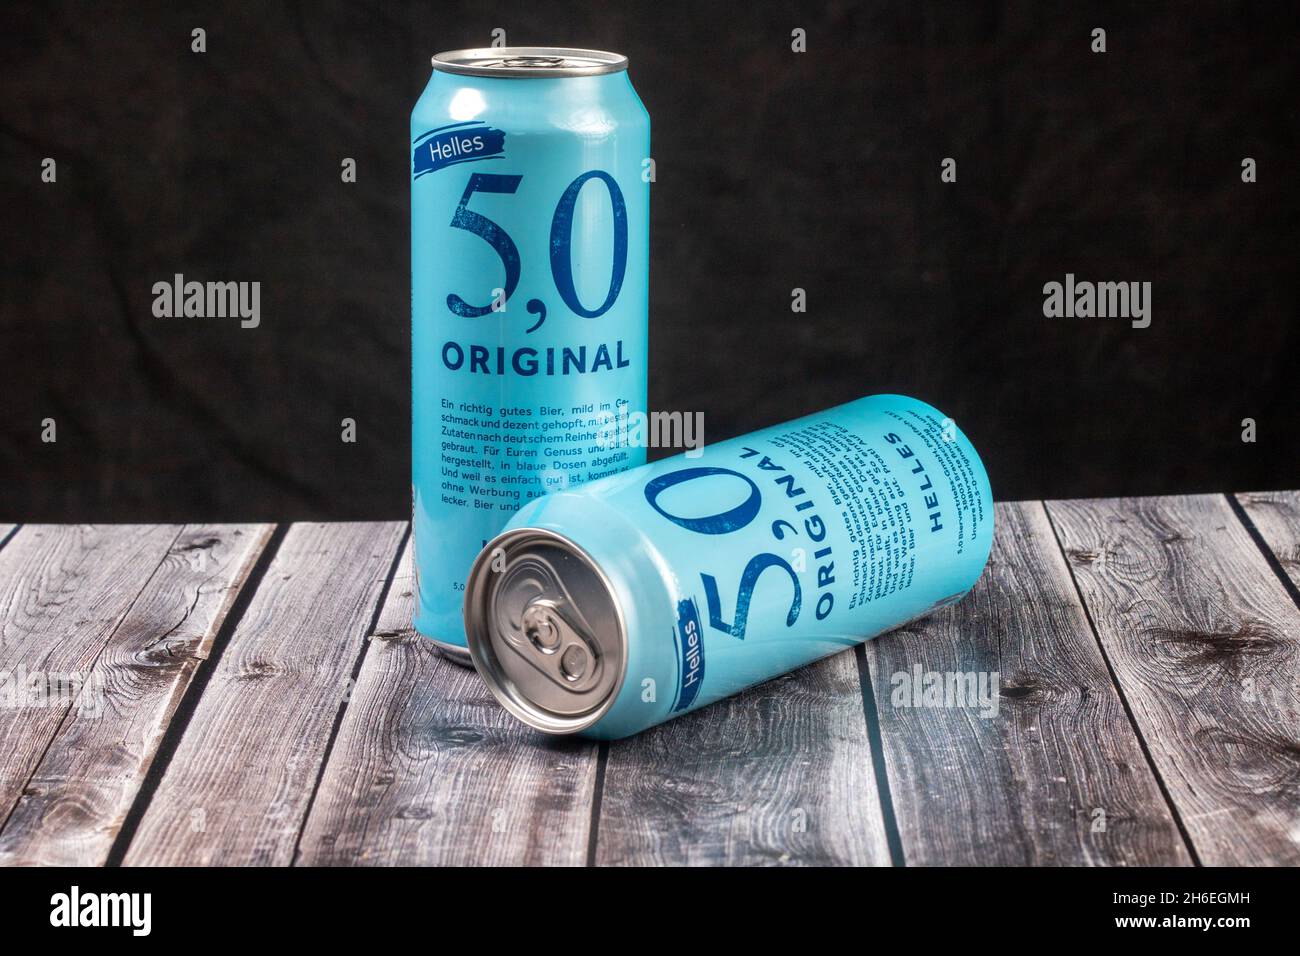 Neckargemuend, Germany - Oktober 17, 2021: two cans of german beer brand 5,0 a countrywide sold brand of lower price tier. hell is a typical bavarian Stock Photo